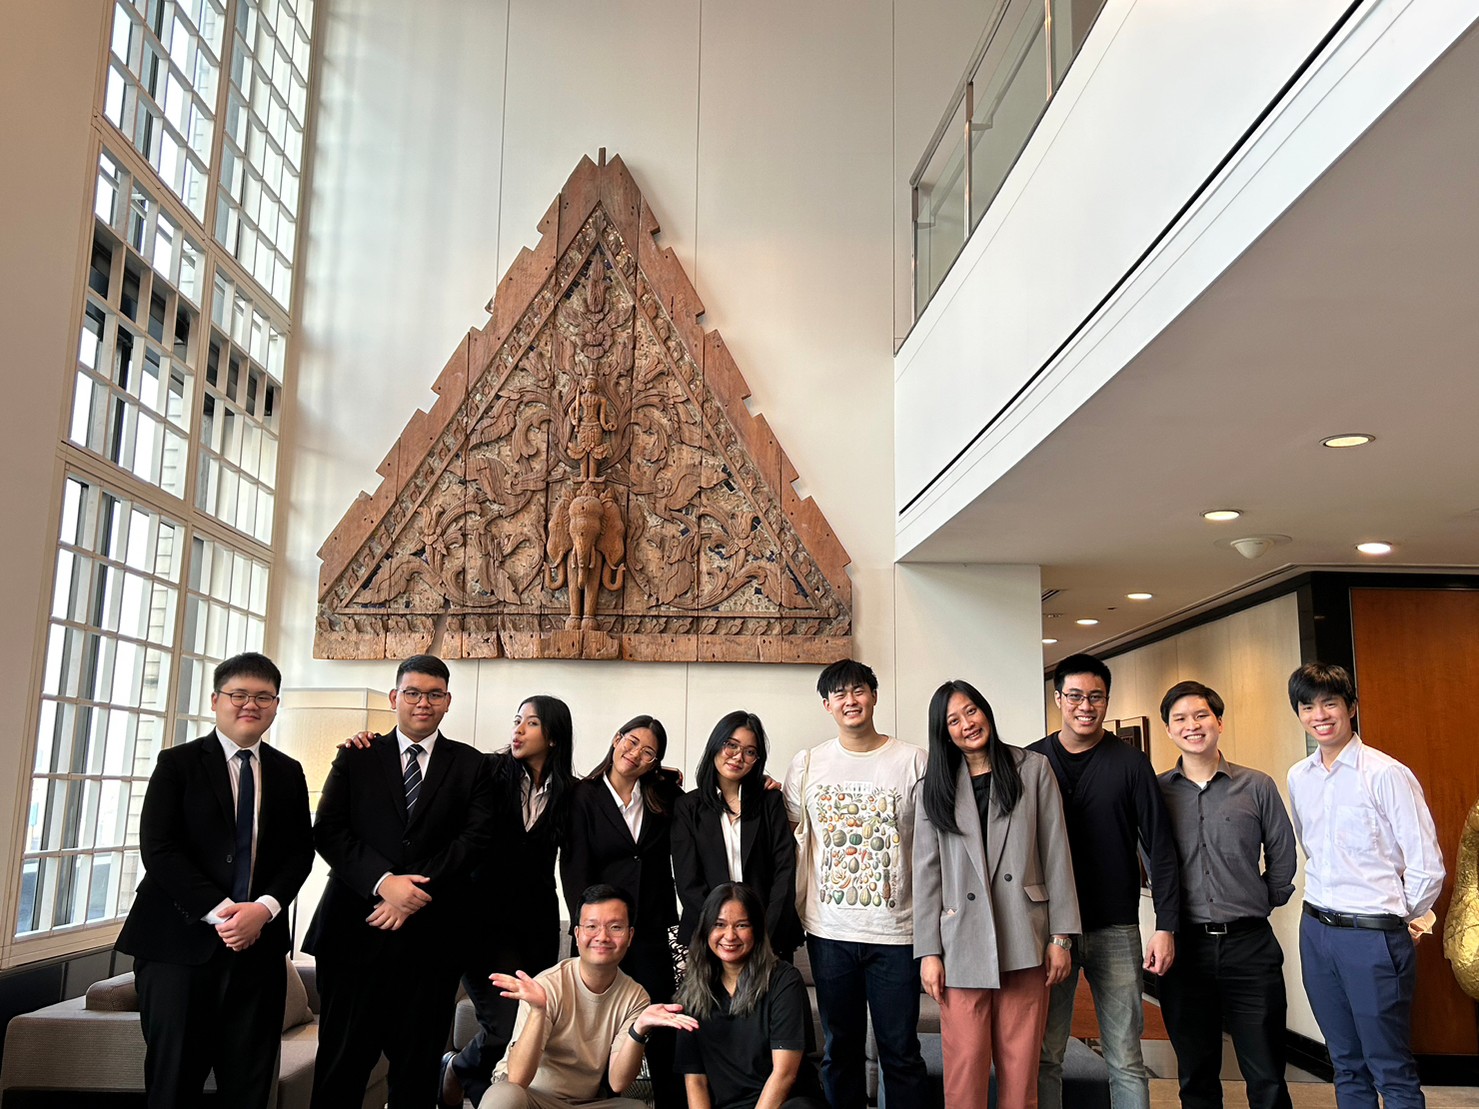 The Thammasat team won Championship Award from the national round of the Philip C. Jessup International Law Moot Court Competition.